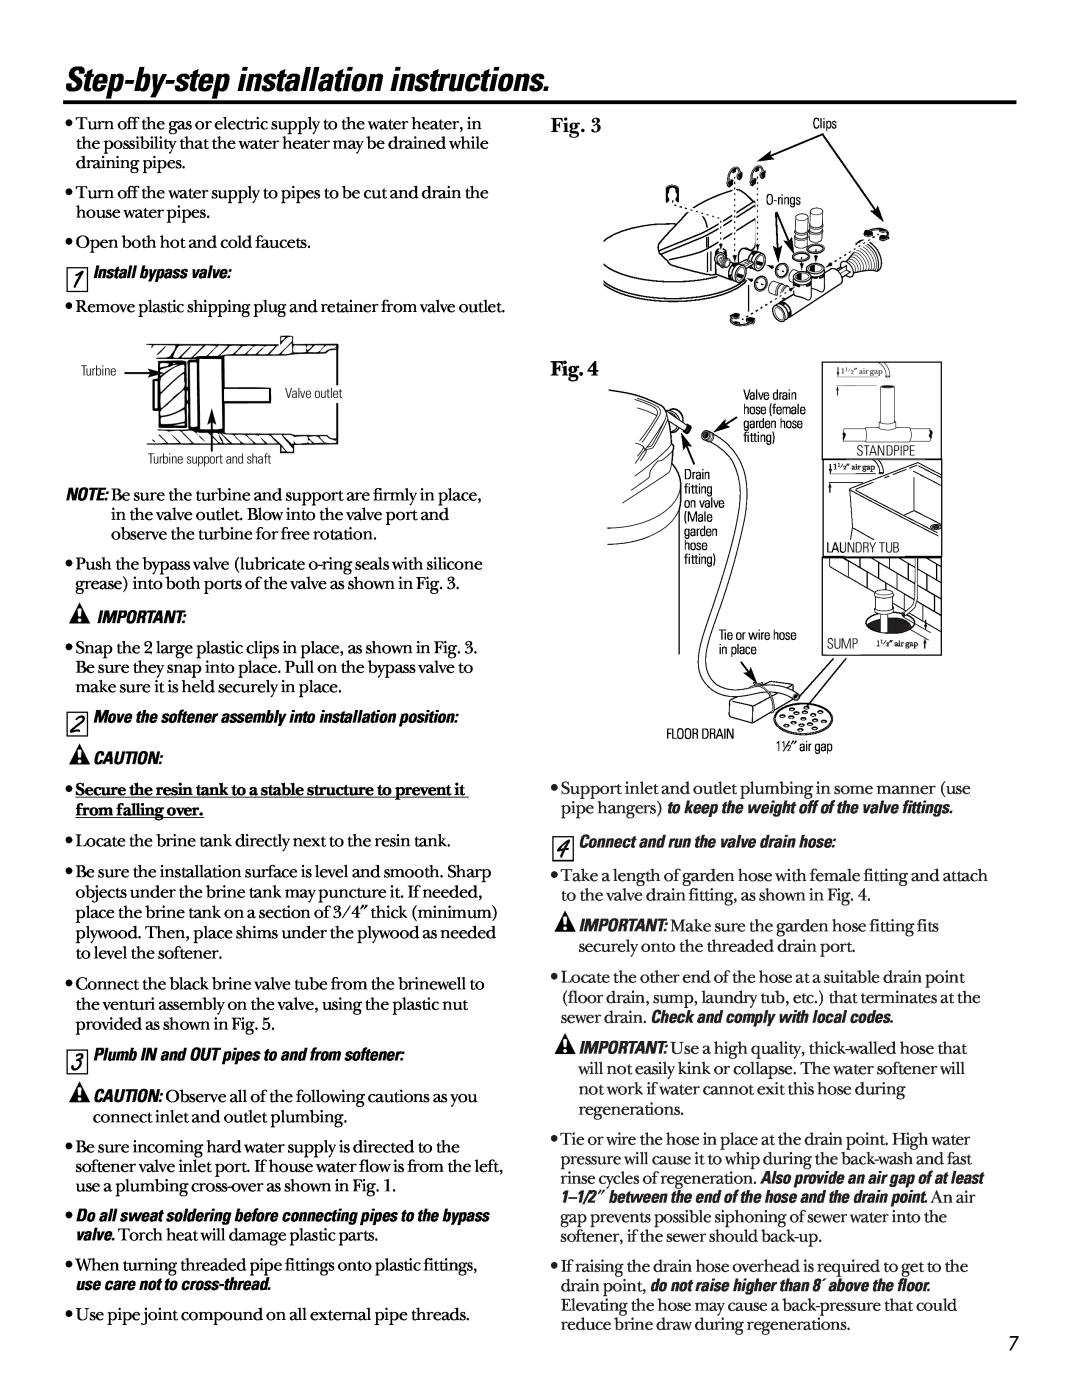 GE GNSF48A01 Step-by-step installation instructions, Install bypass valve, Plumb IN and OUT pipes to and from softener 